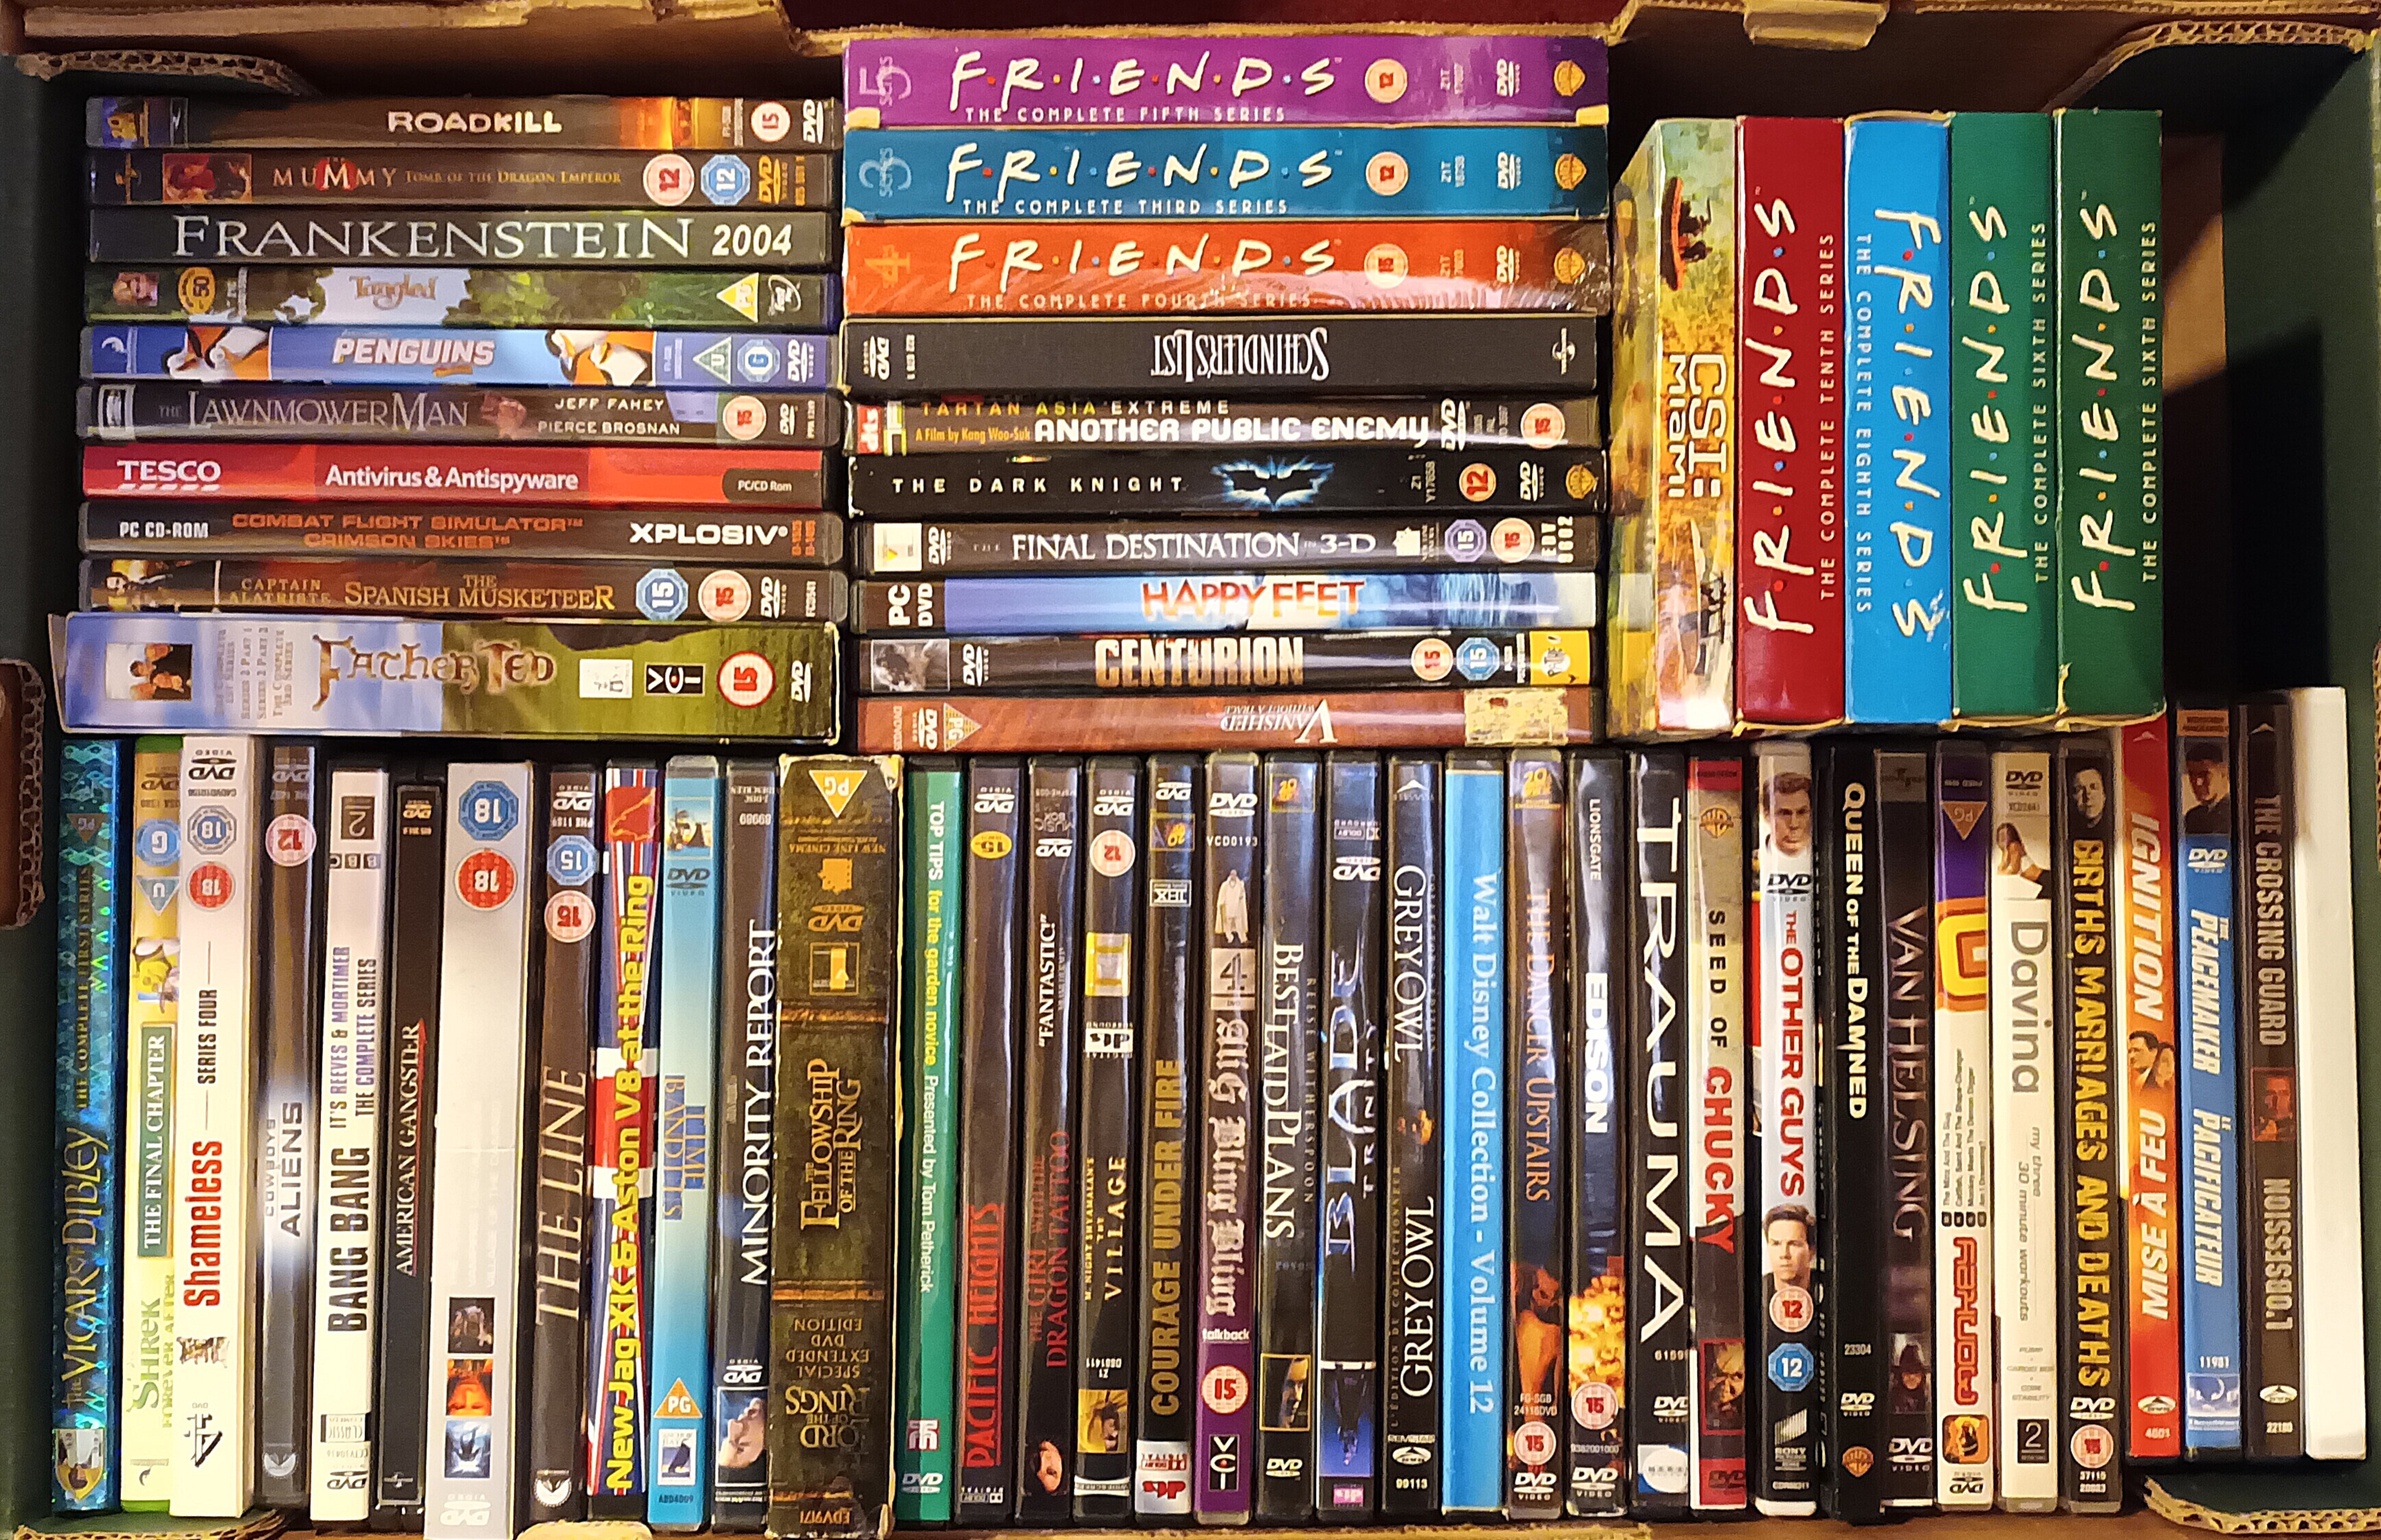 Three boxes of DVDs including films, box sets and documentaries, containing Friends, Ally McBeal, - Image 4 of 4